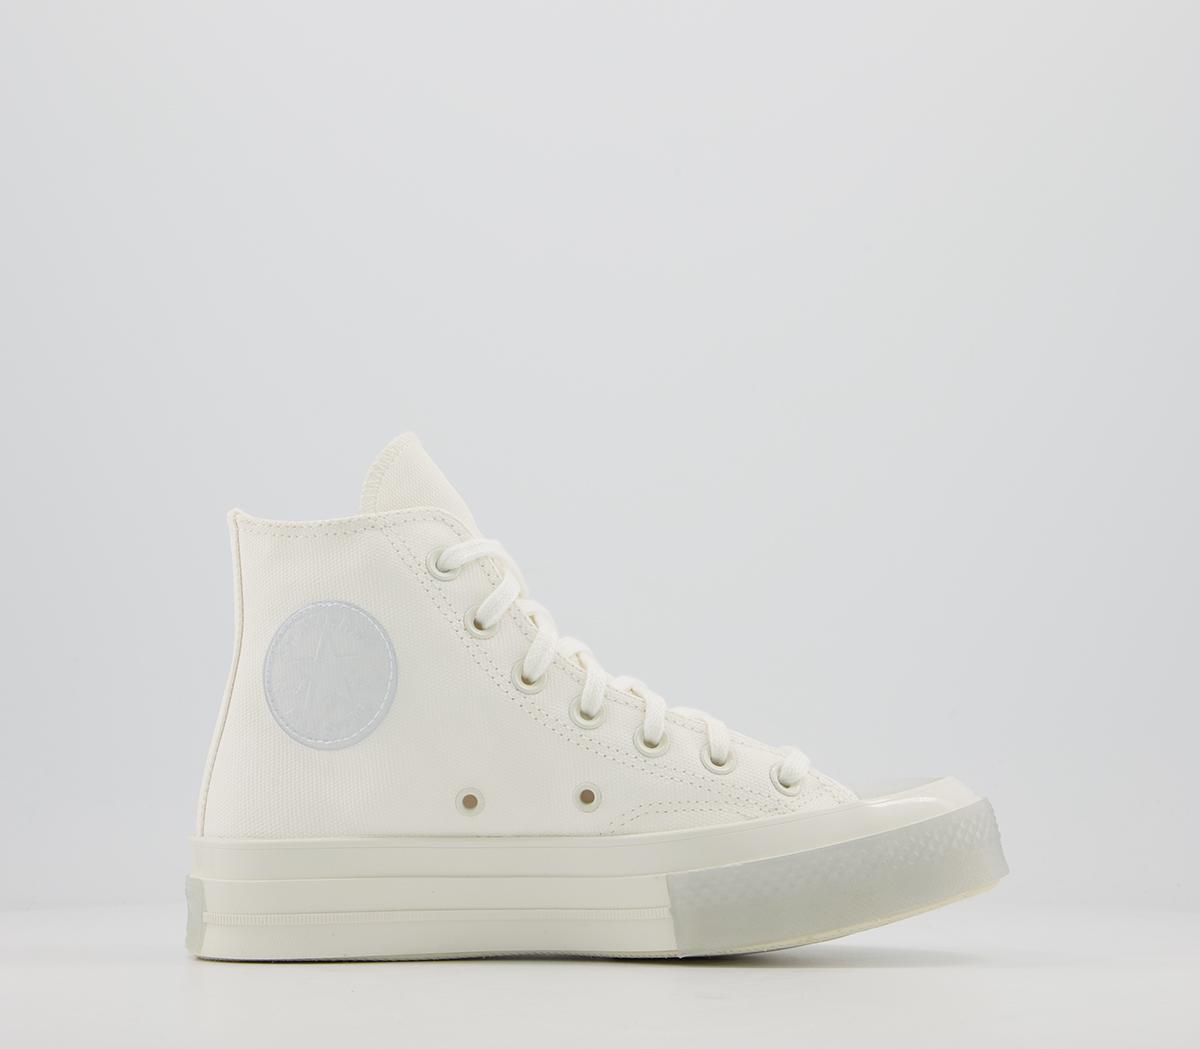 Converse All Star Hi 70s Trainers 